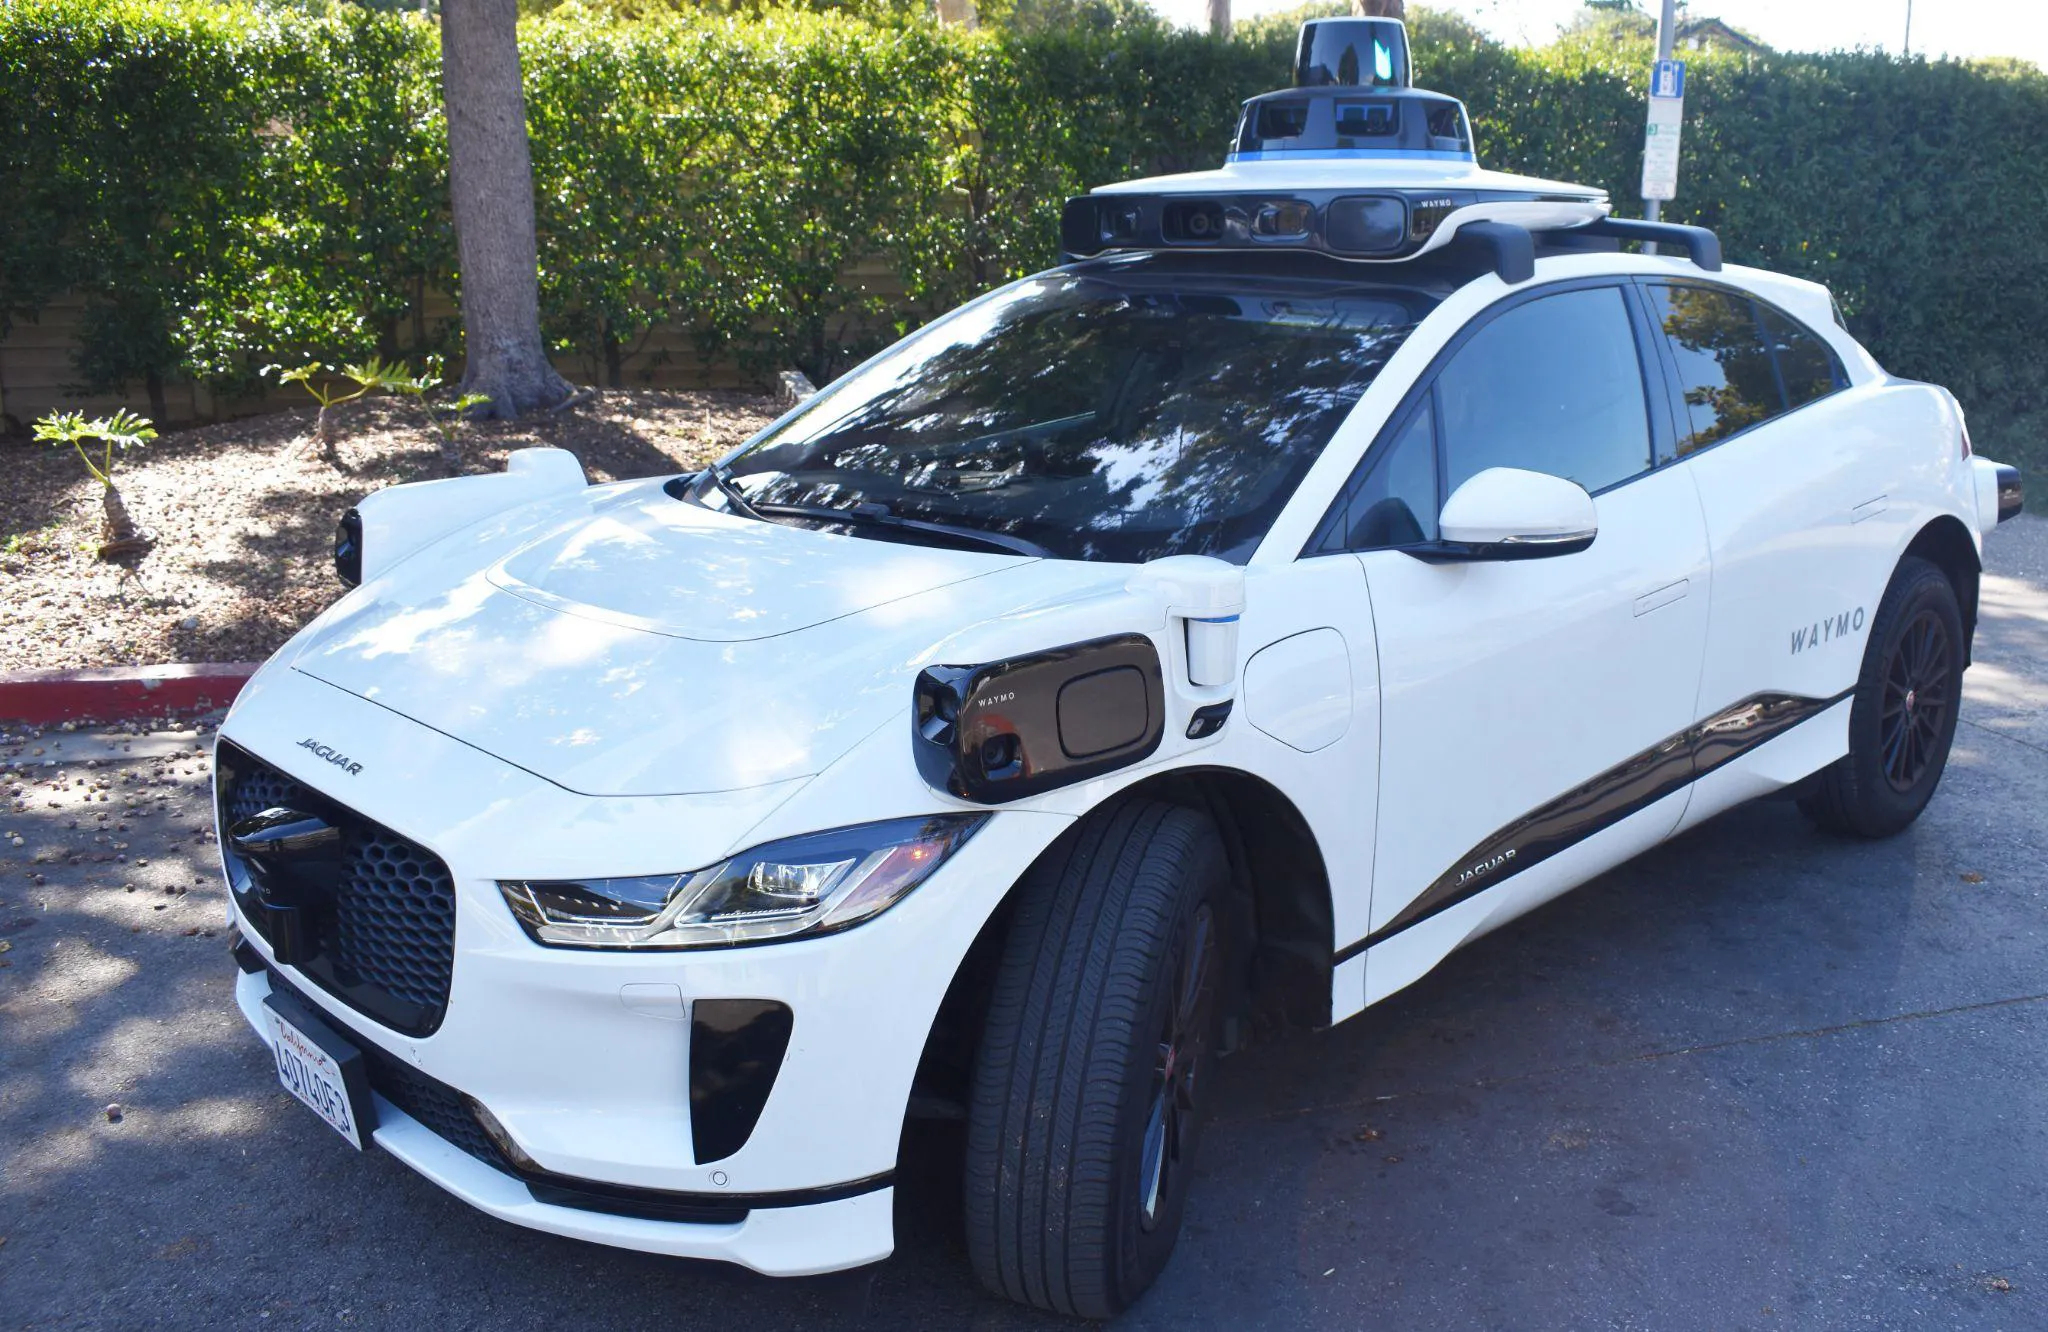 Current Robotaxi Incidents Highlight Superiority of Human Drivers